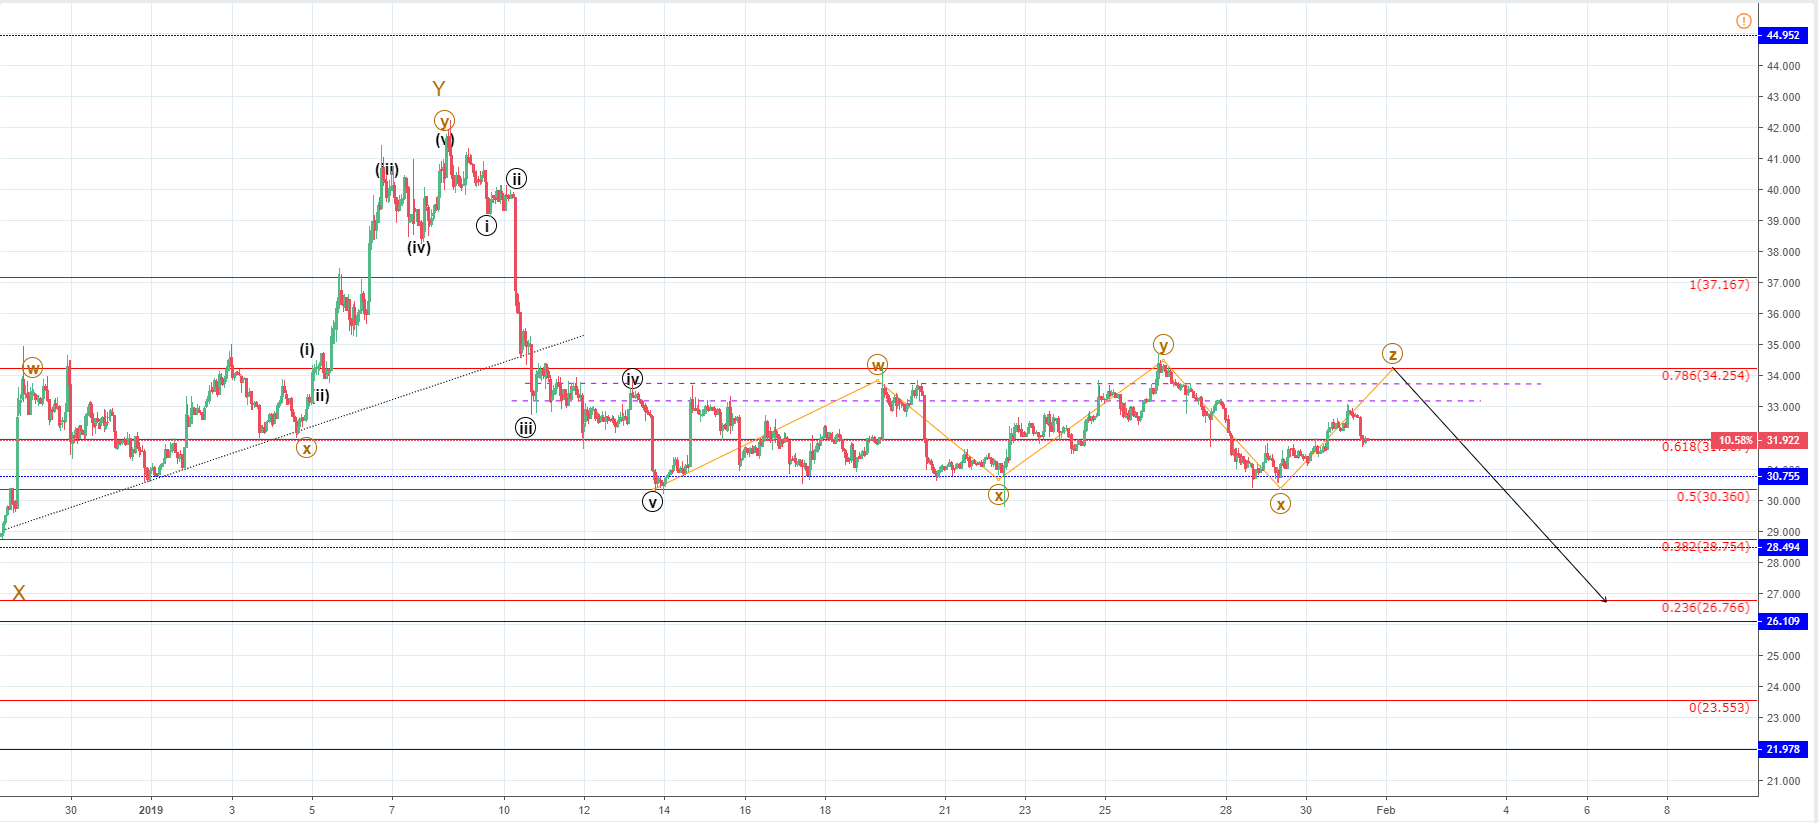 LTC/USD and EOS/USD: downside is expected